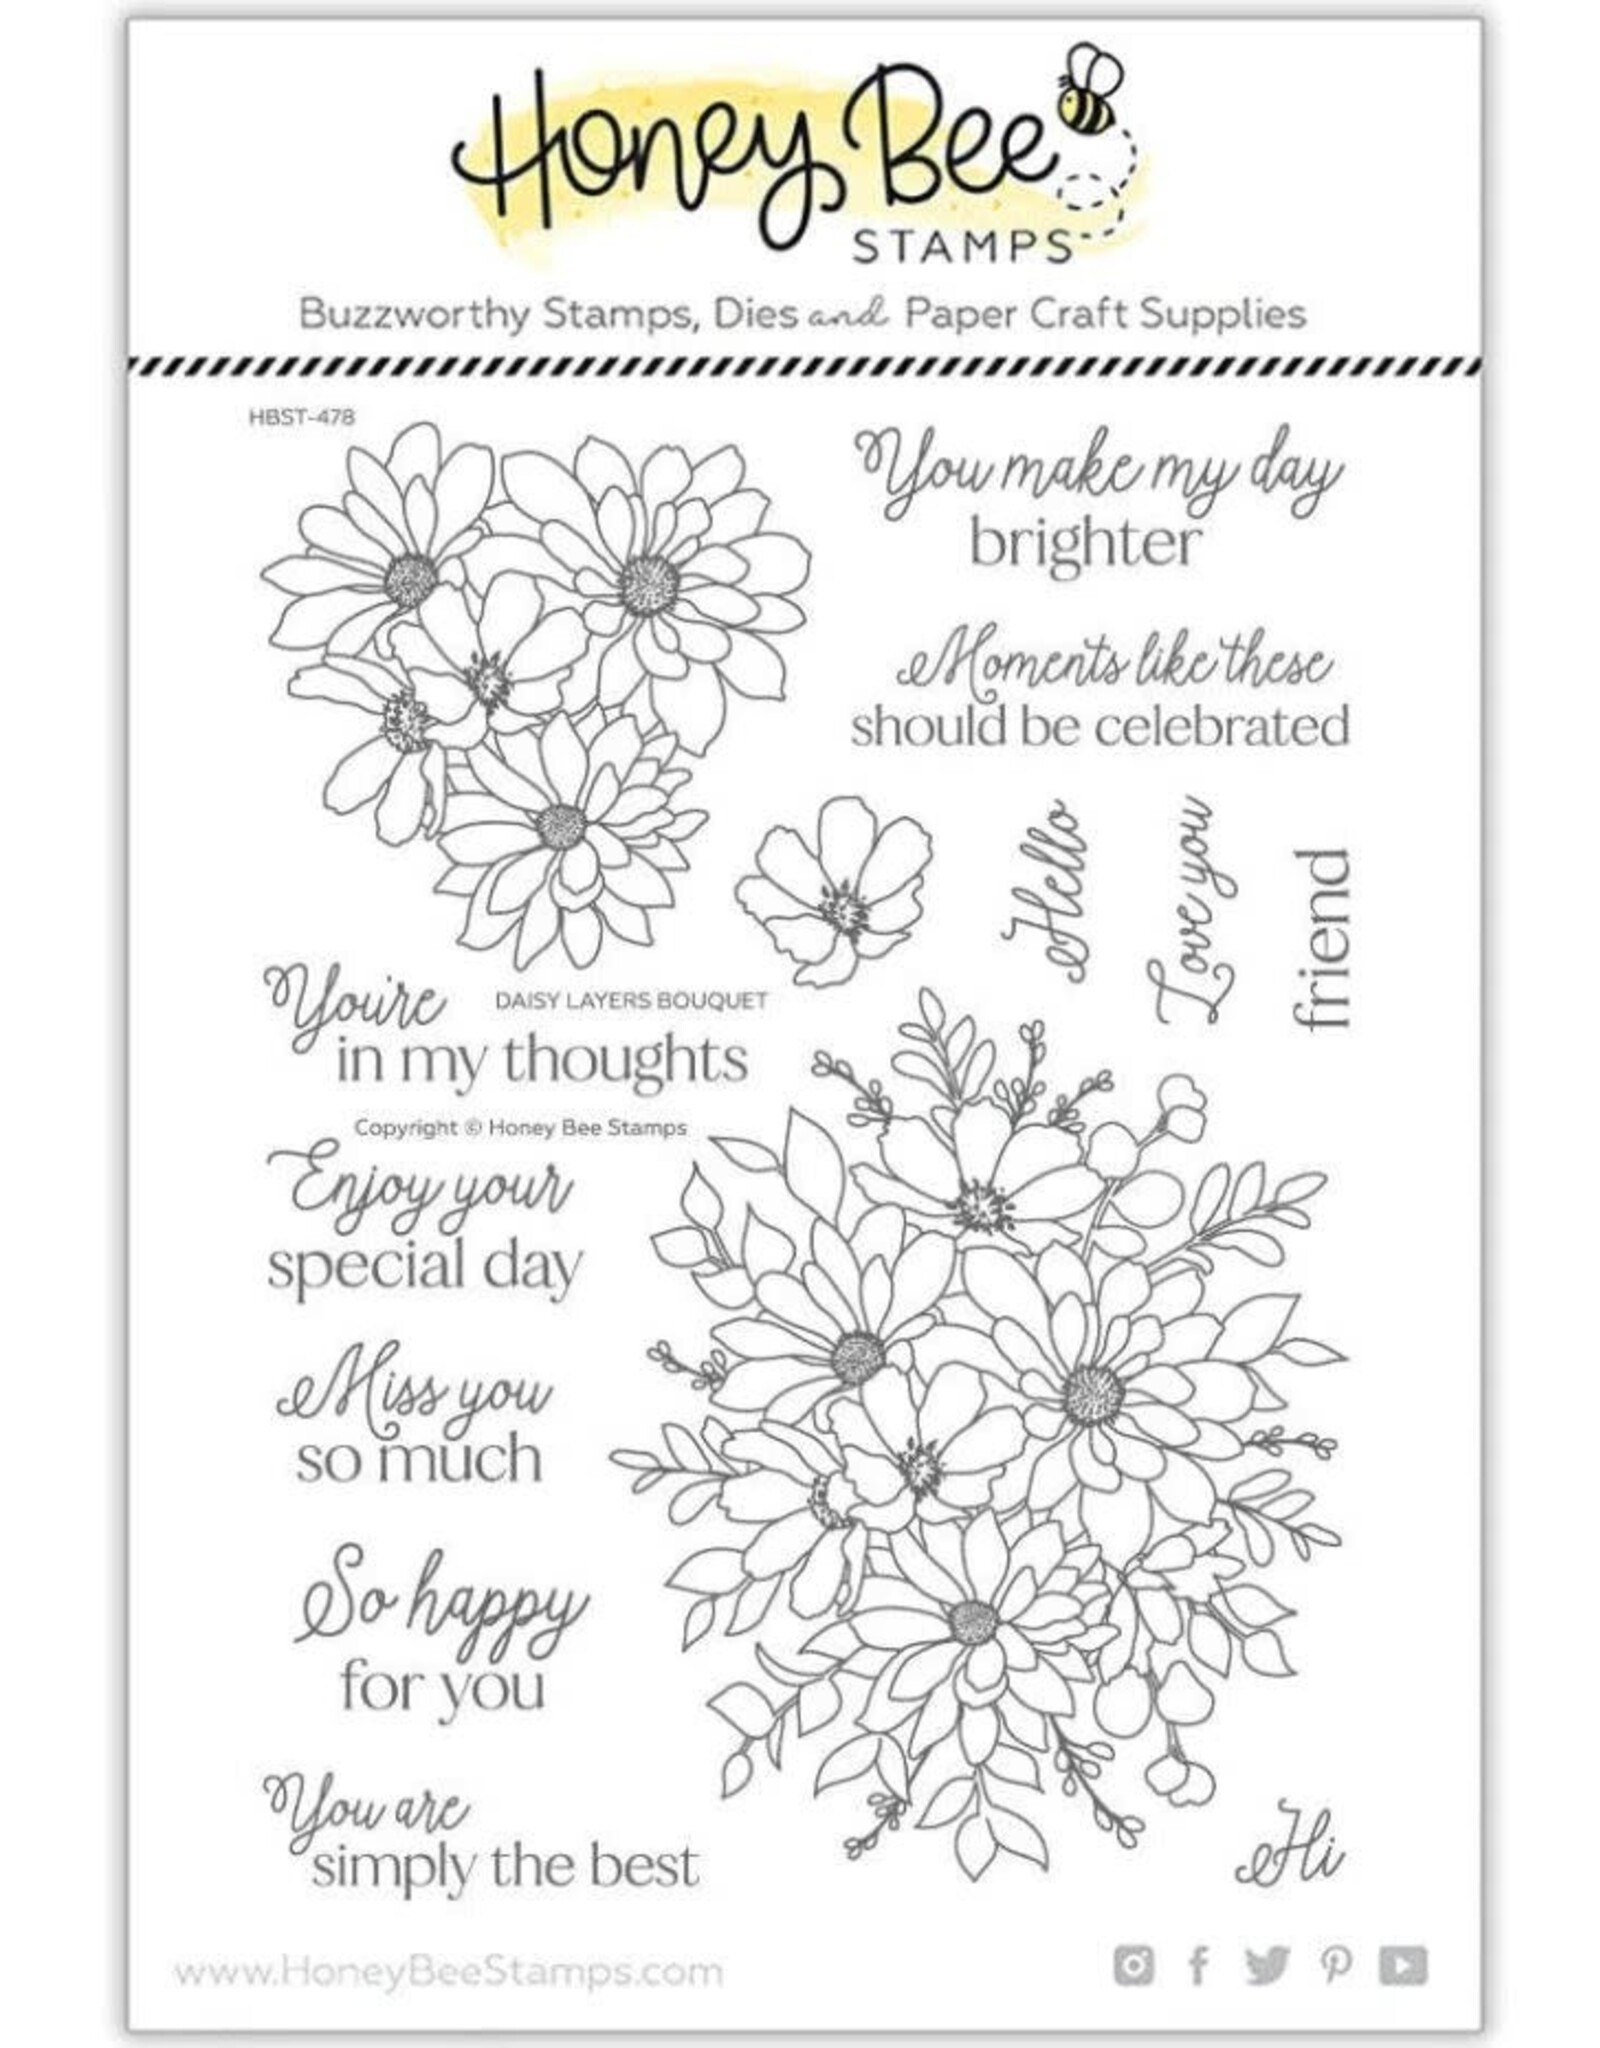 Honey Bee Daisy Layers Bouquet Stamp Set